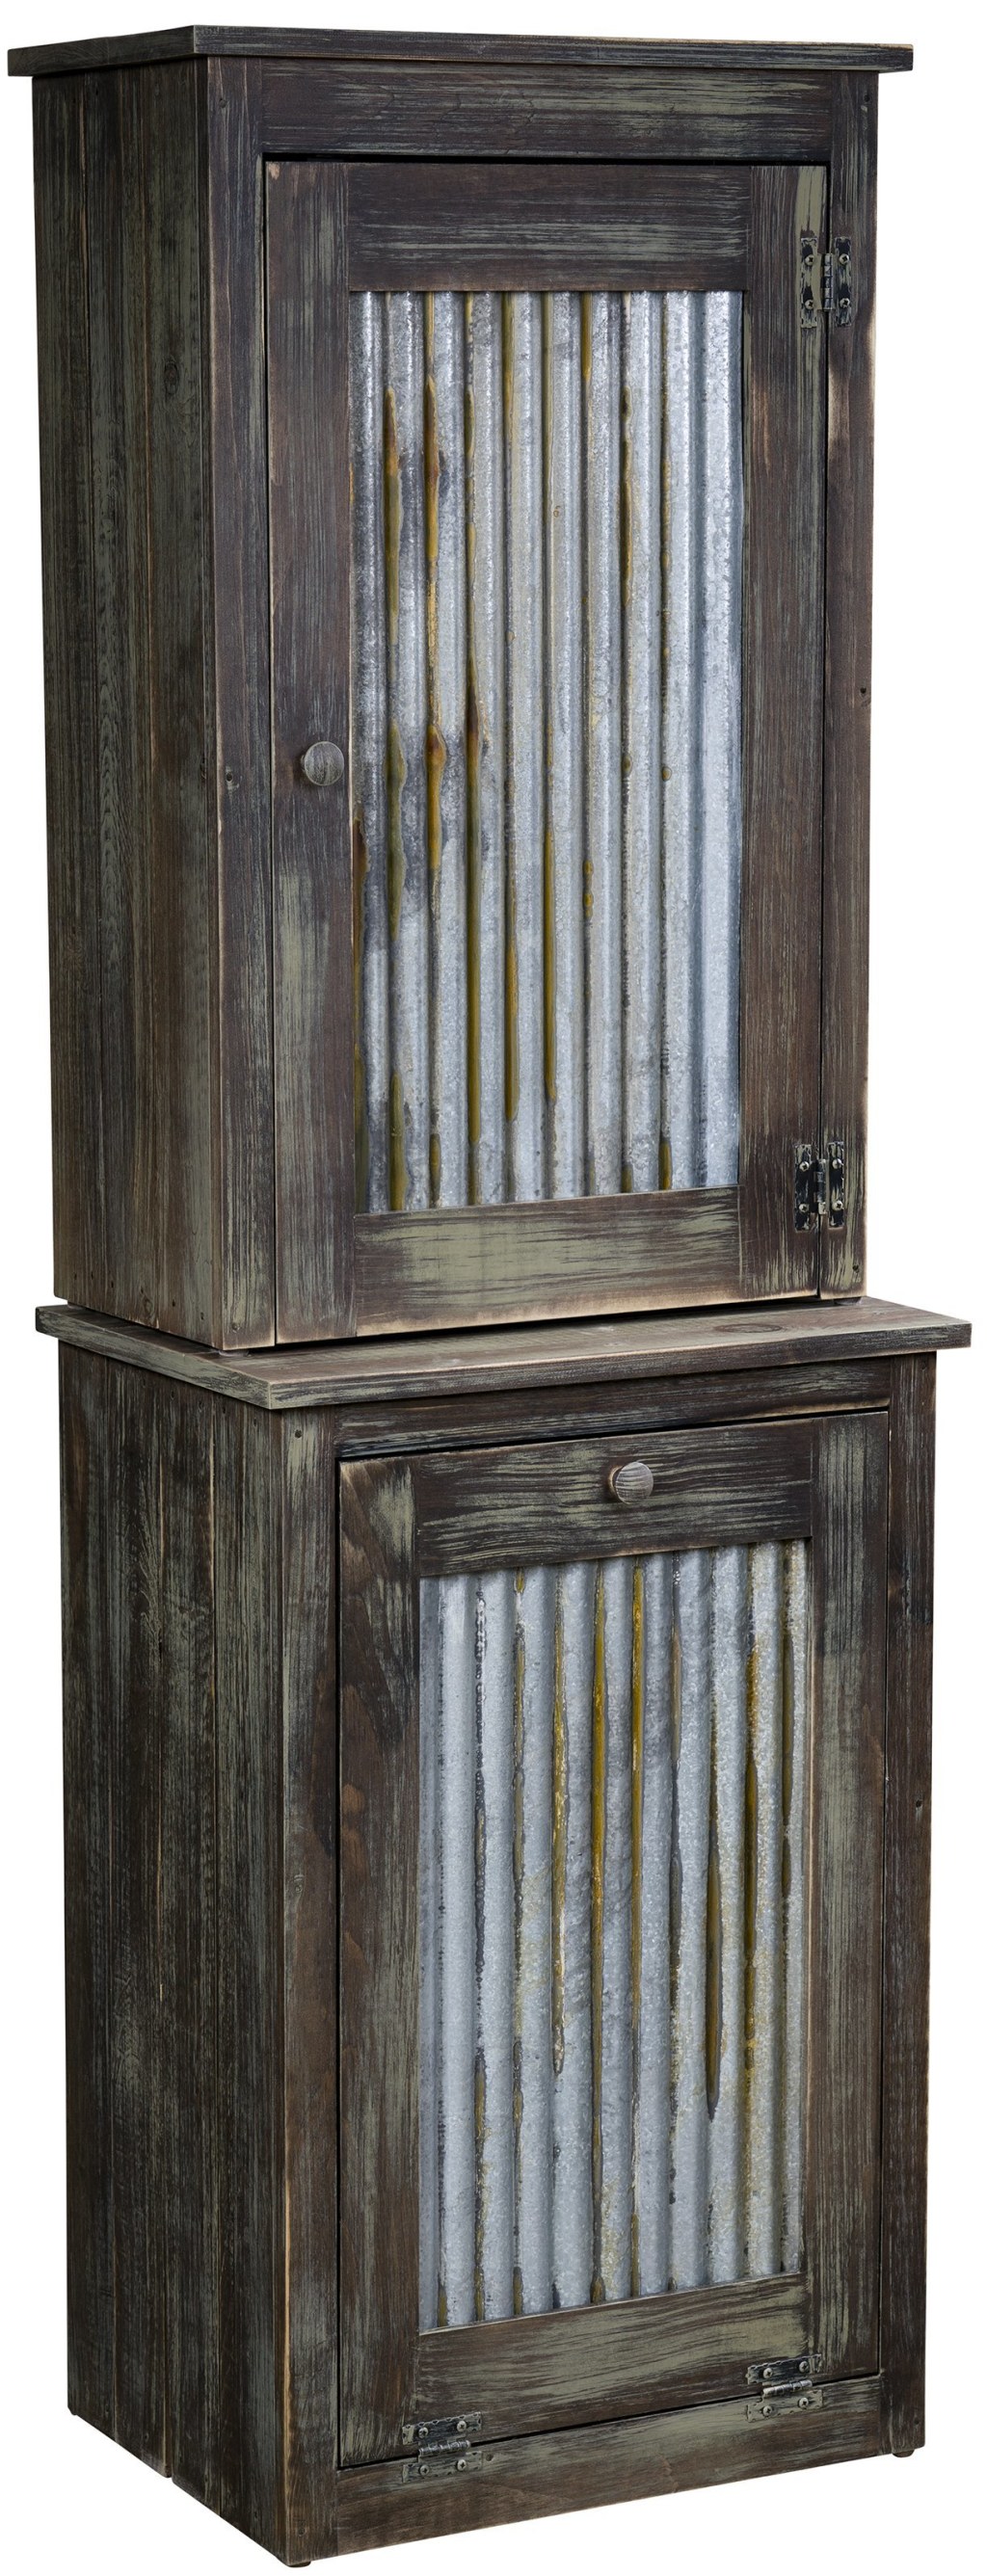 Picture of: Amish Gold Mine Trash Bin with Optional Hutch